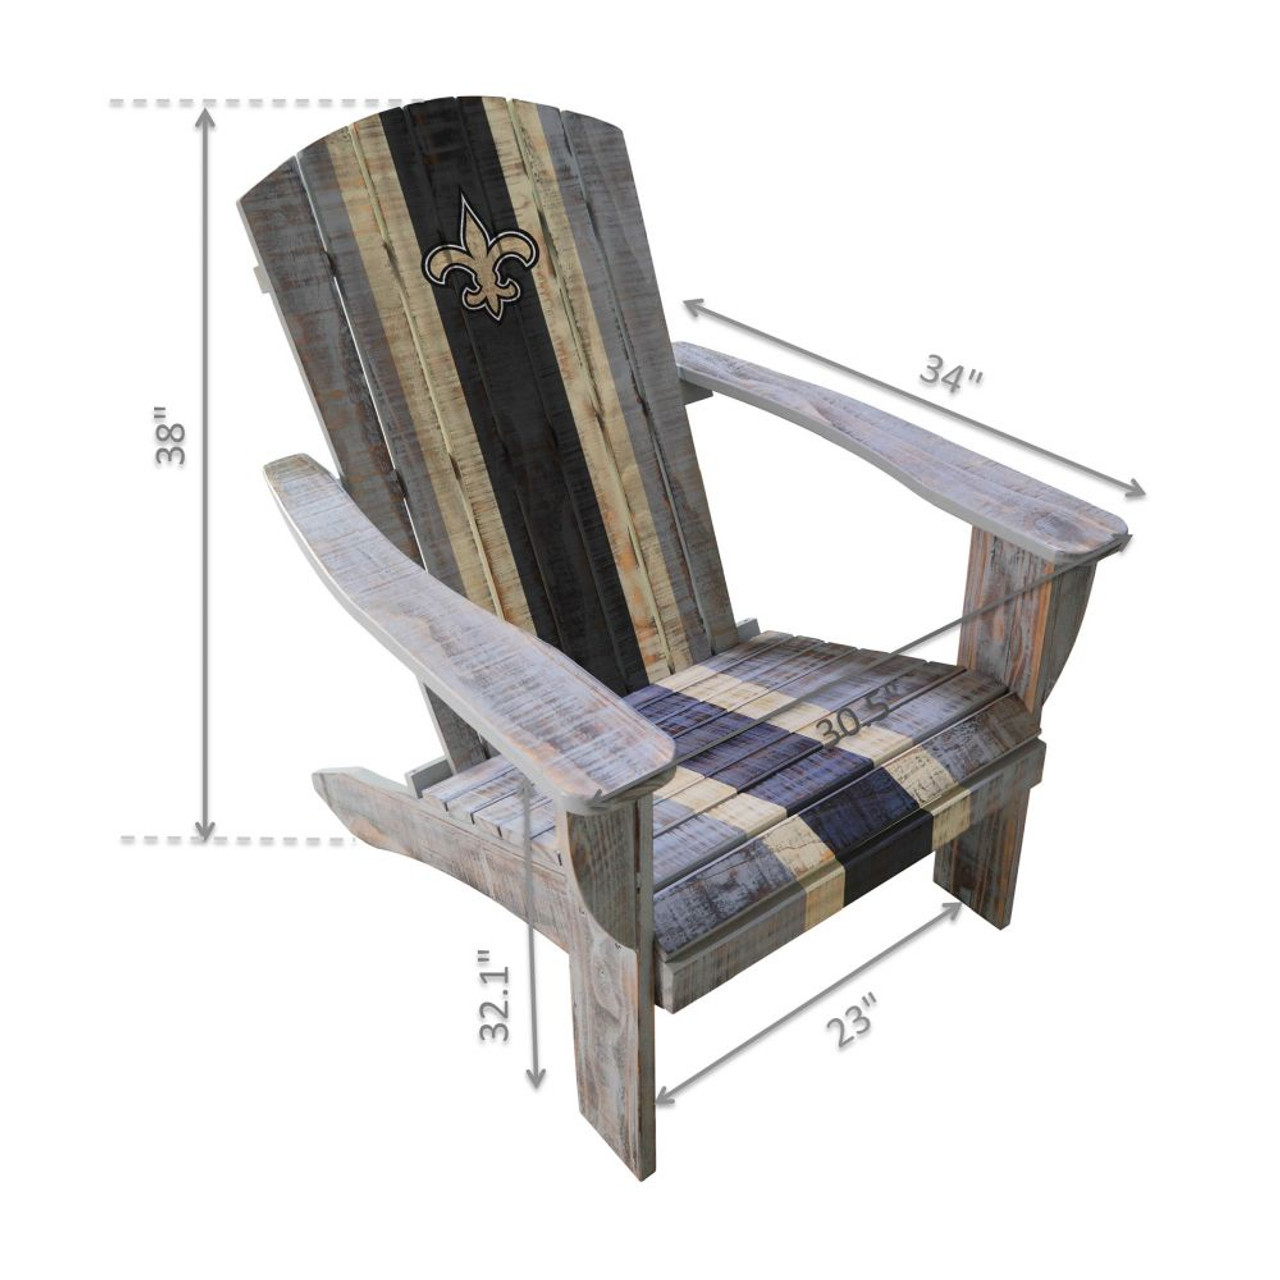 511-1031, New Orleans, NOLA, NO, Saints, Wood, Adirondack, Chair, NFL, Imperial, FREE SHIPPING, 720801110318